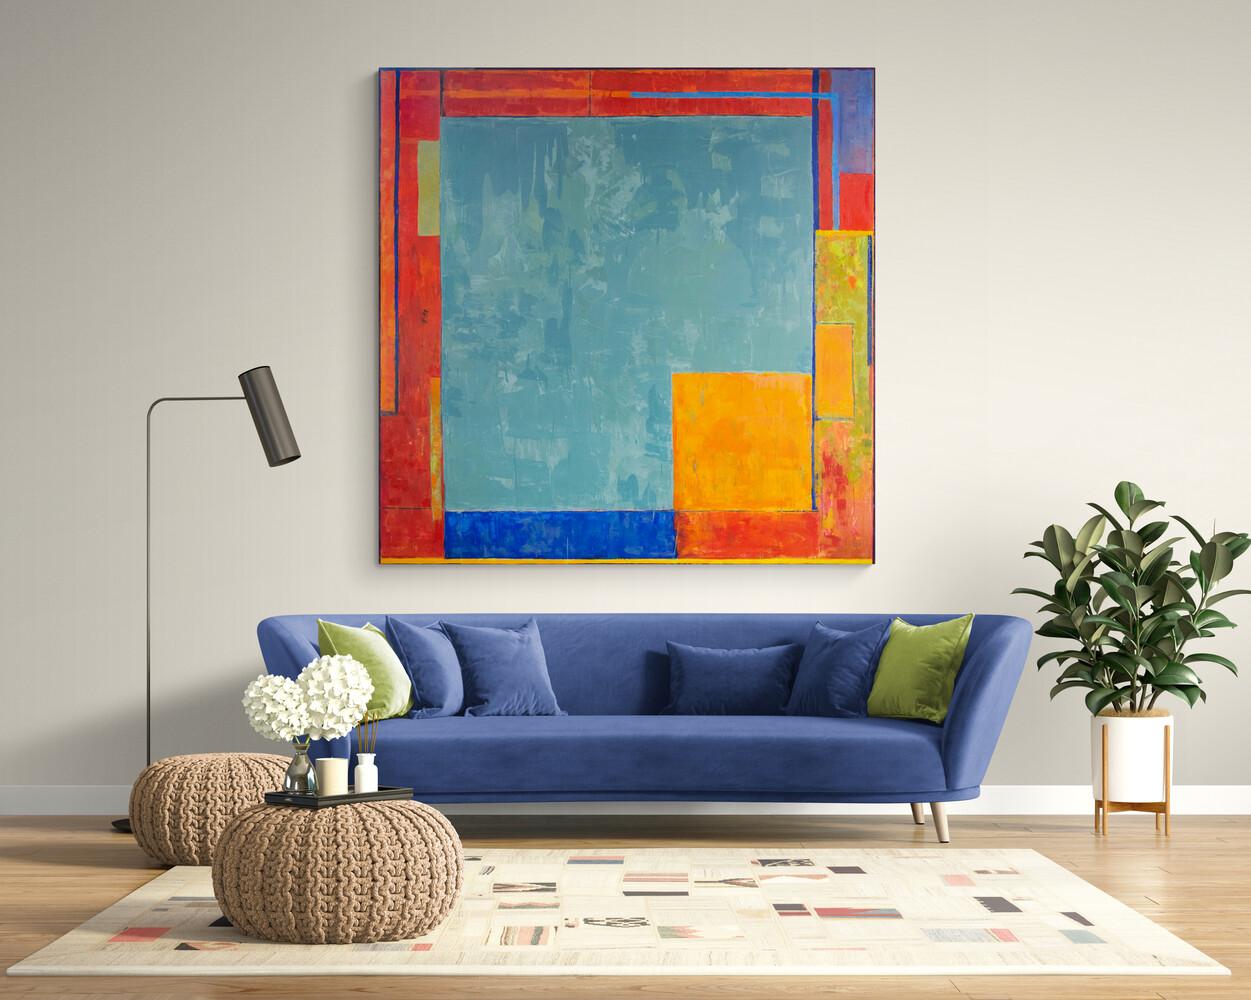 Gaze Big Green - large, colorful, geometric abstract, contemporary oil on canvas - Contemporary Painting by David Sorensen